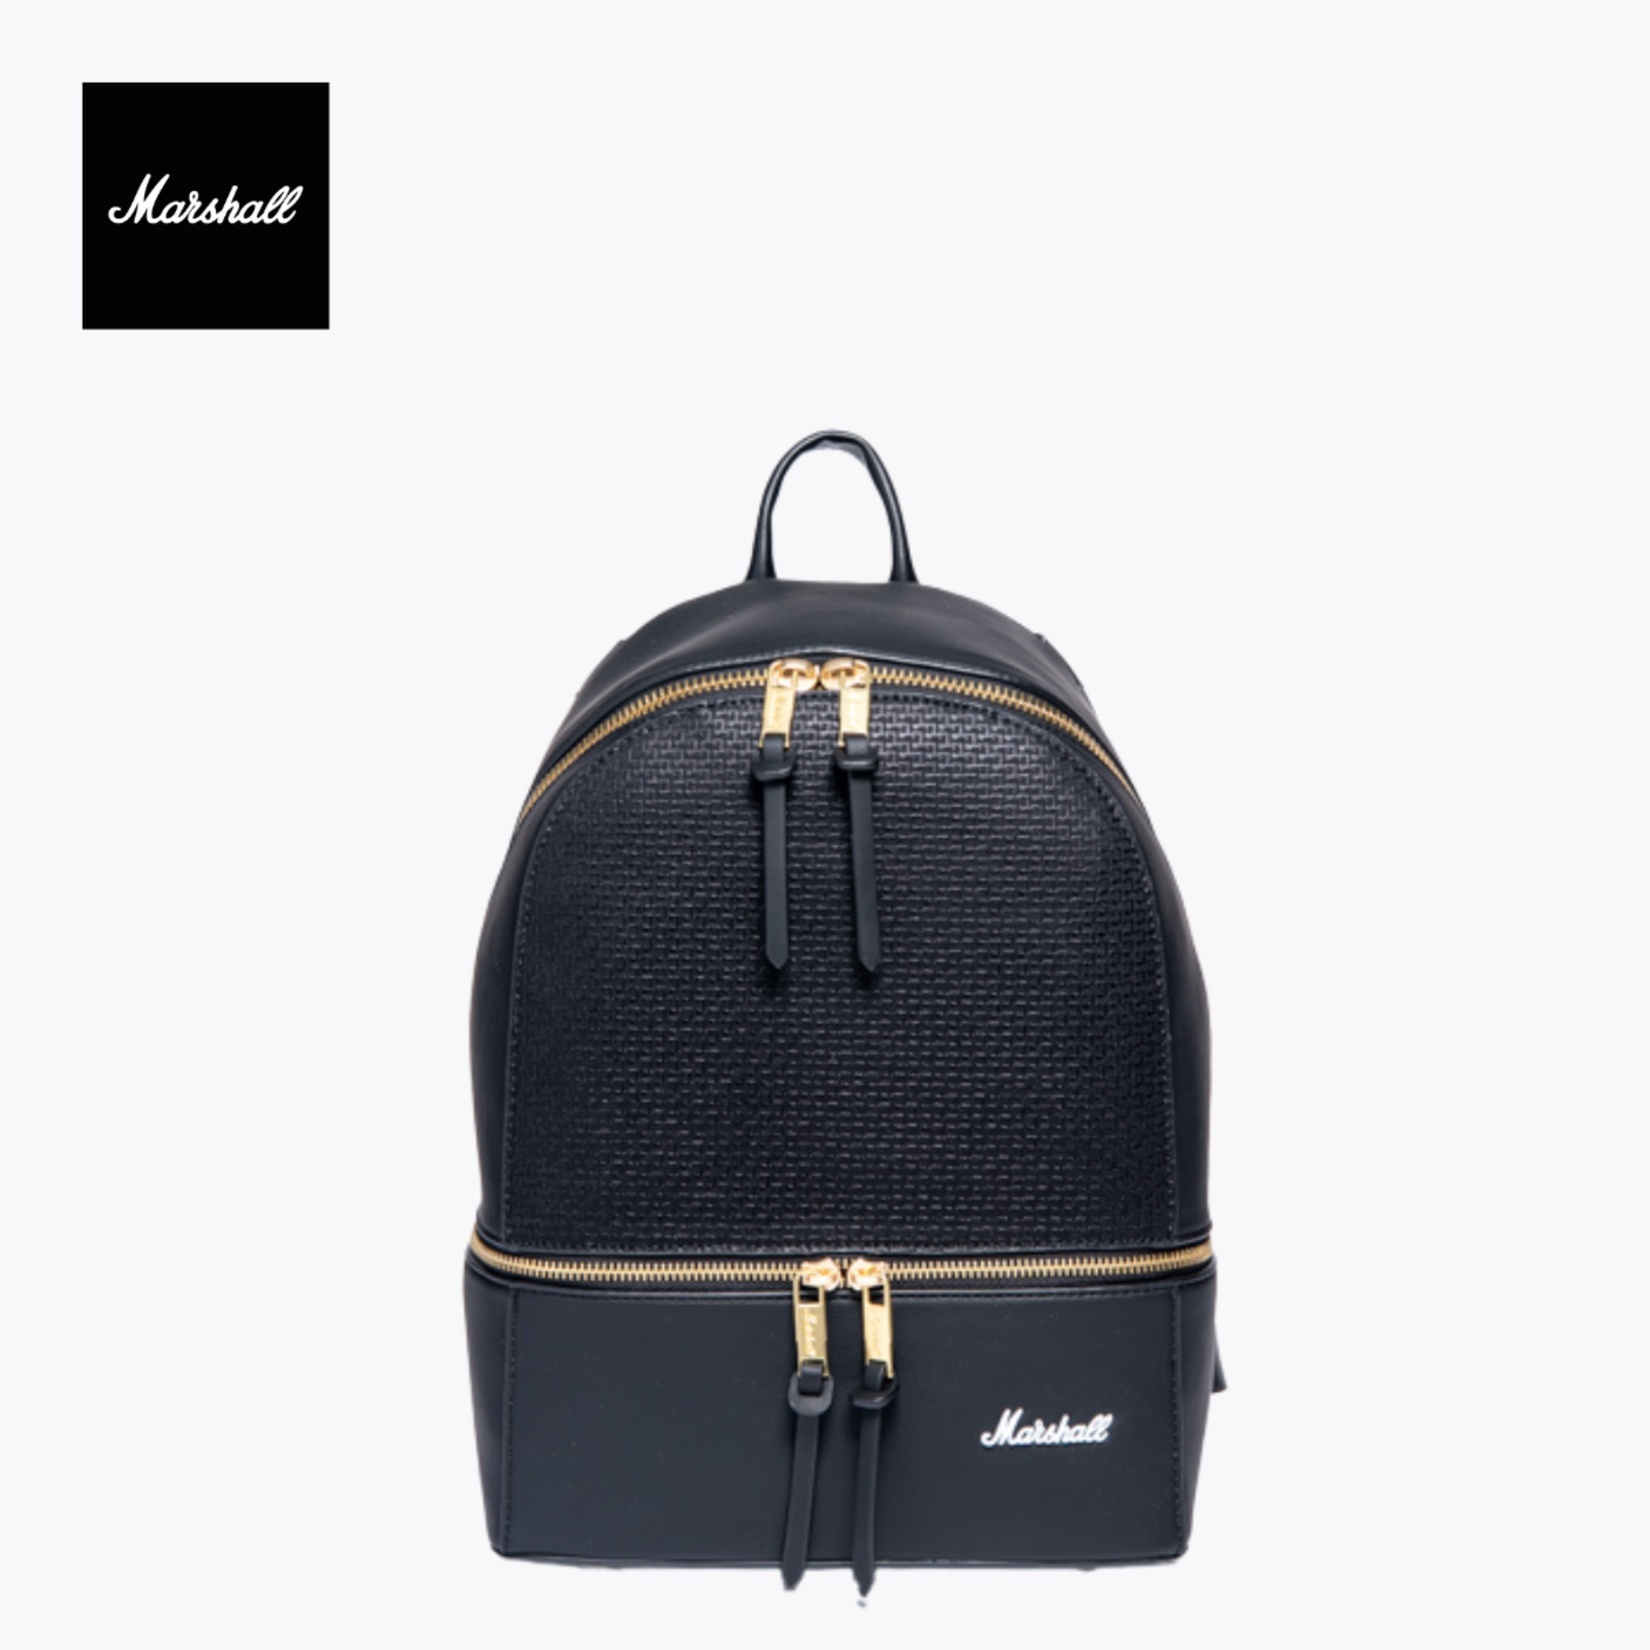 marshall-downtown-backpack-black-gold